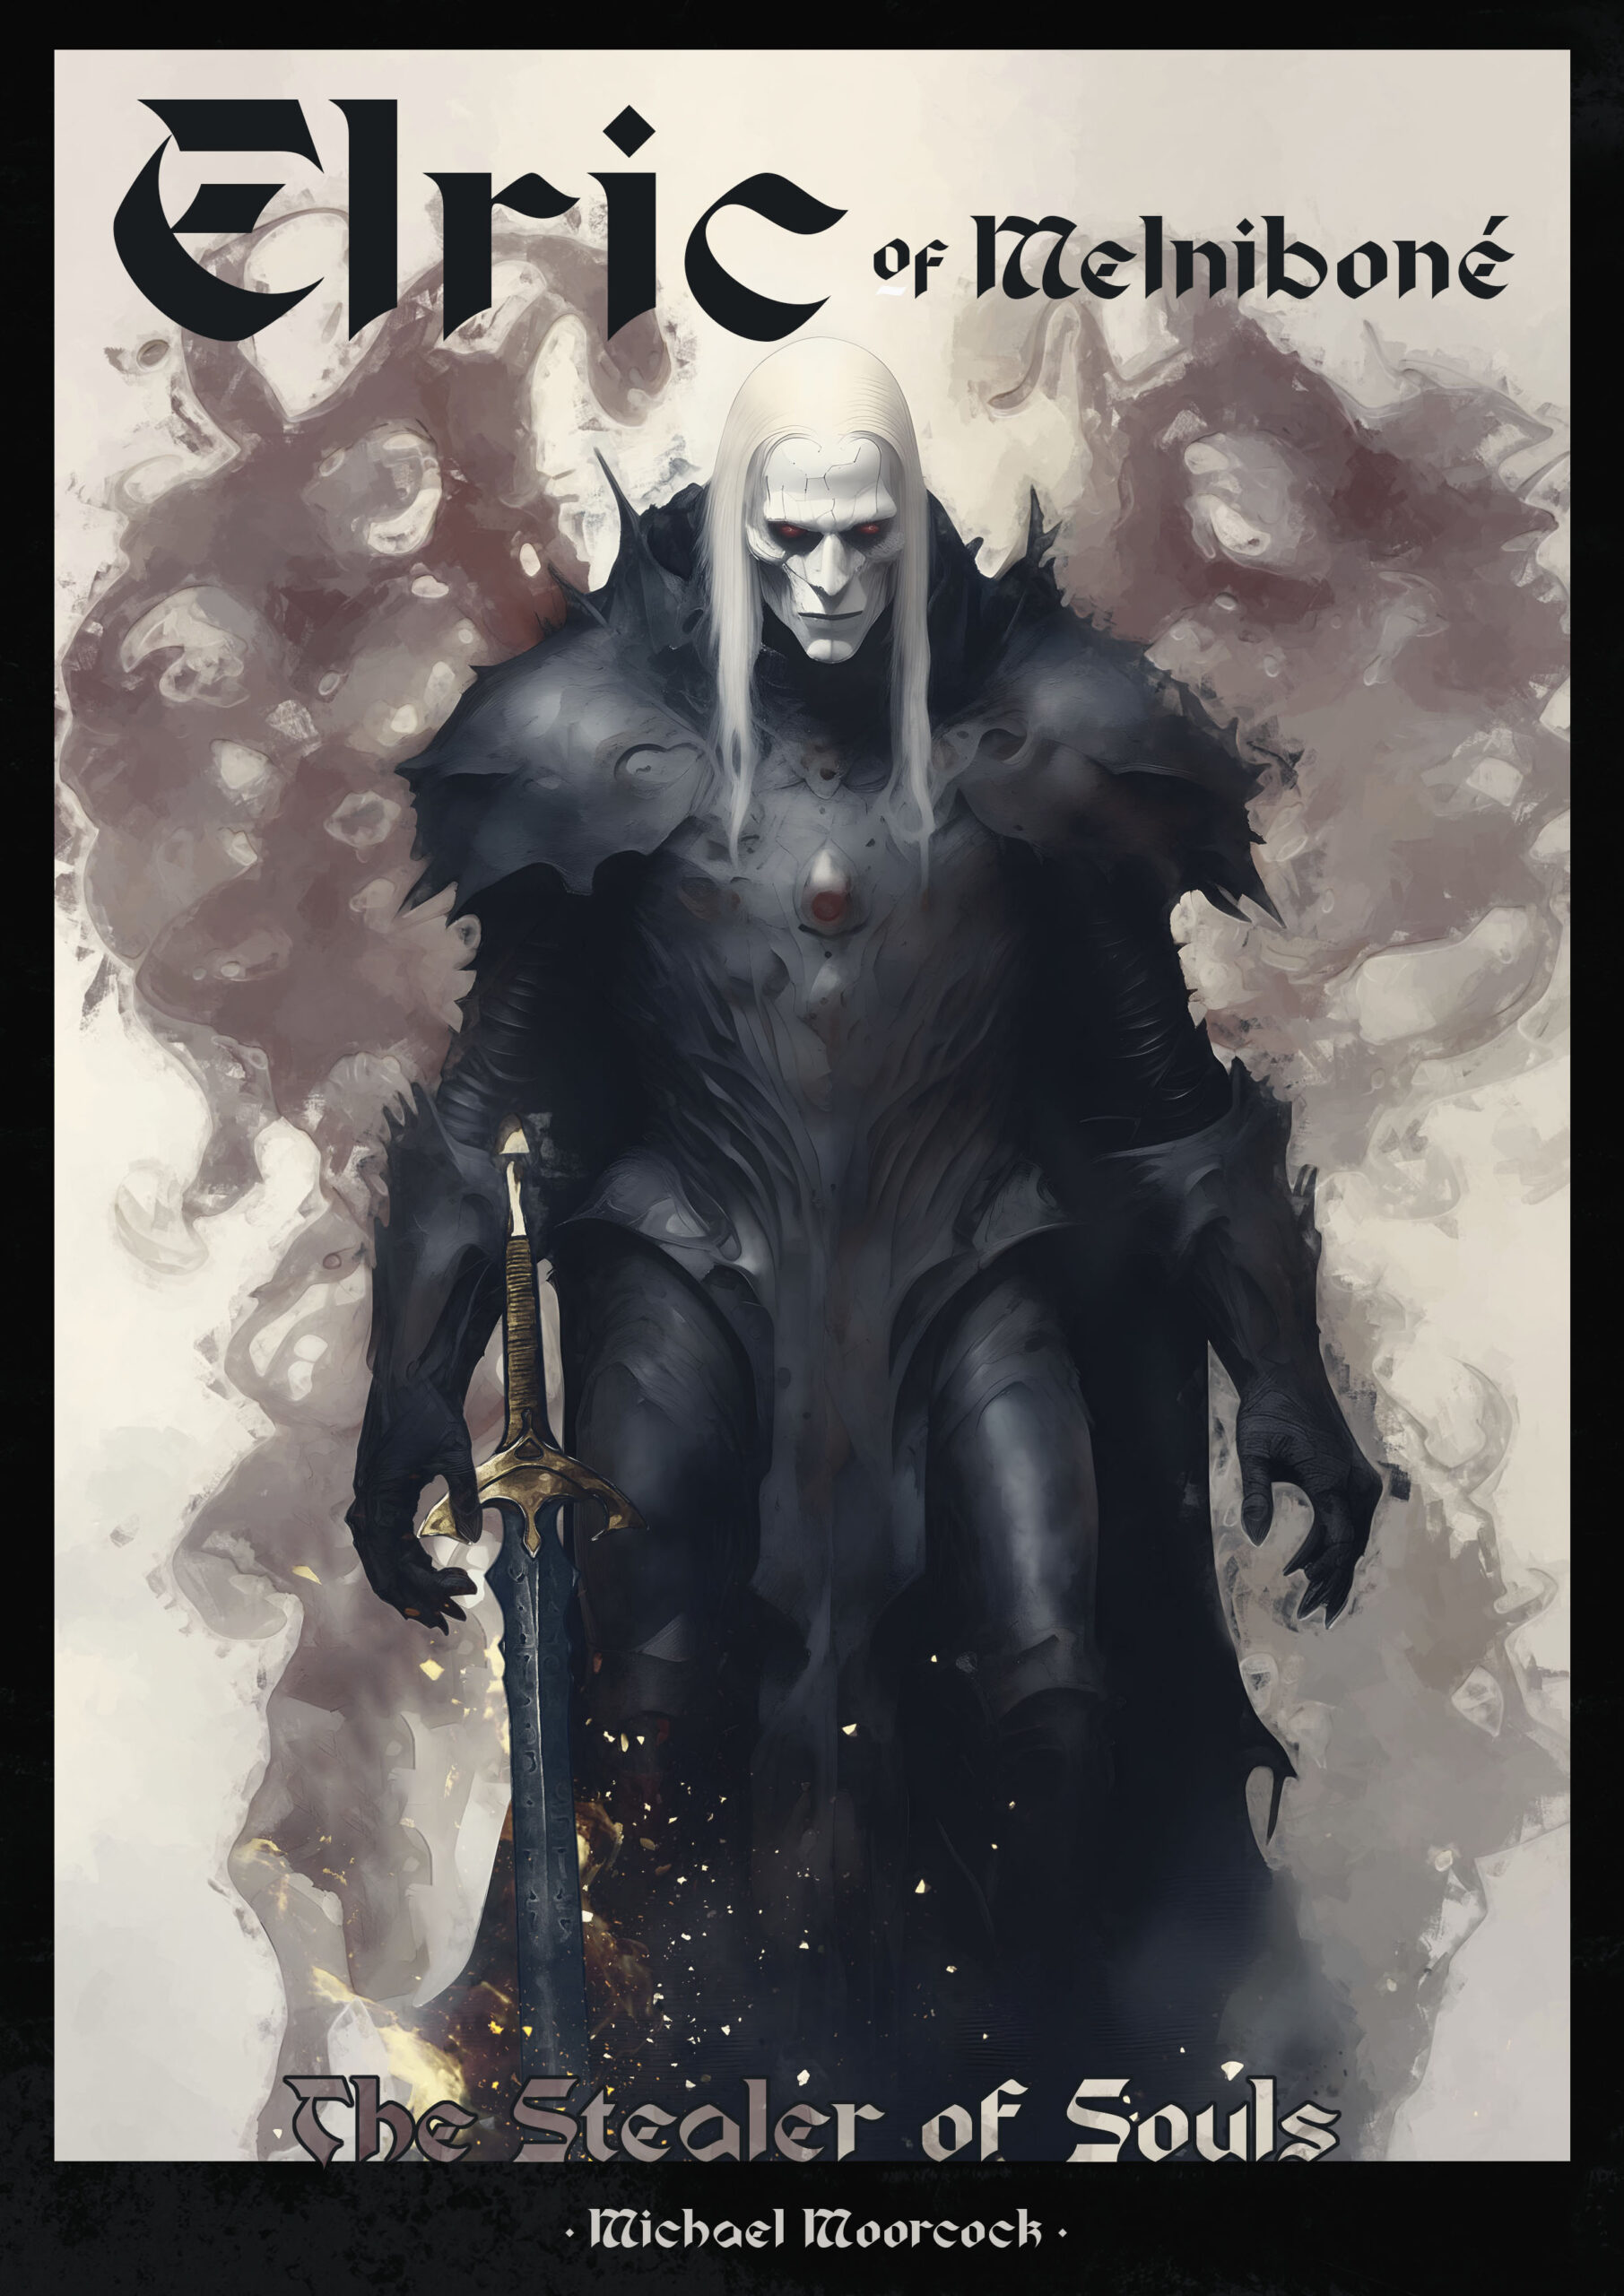 Elric – The Stealer of Souls